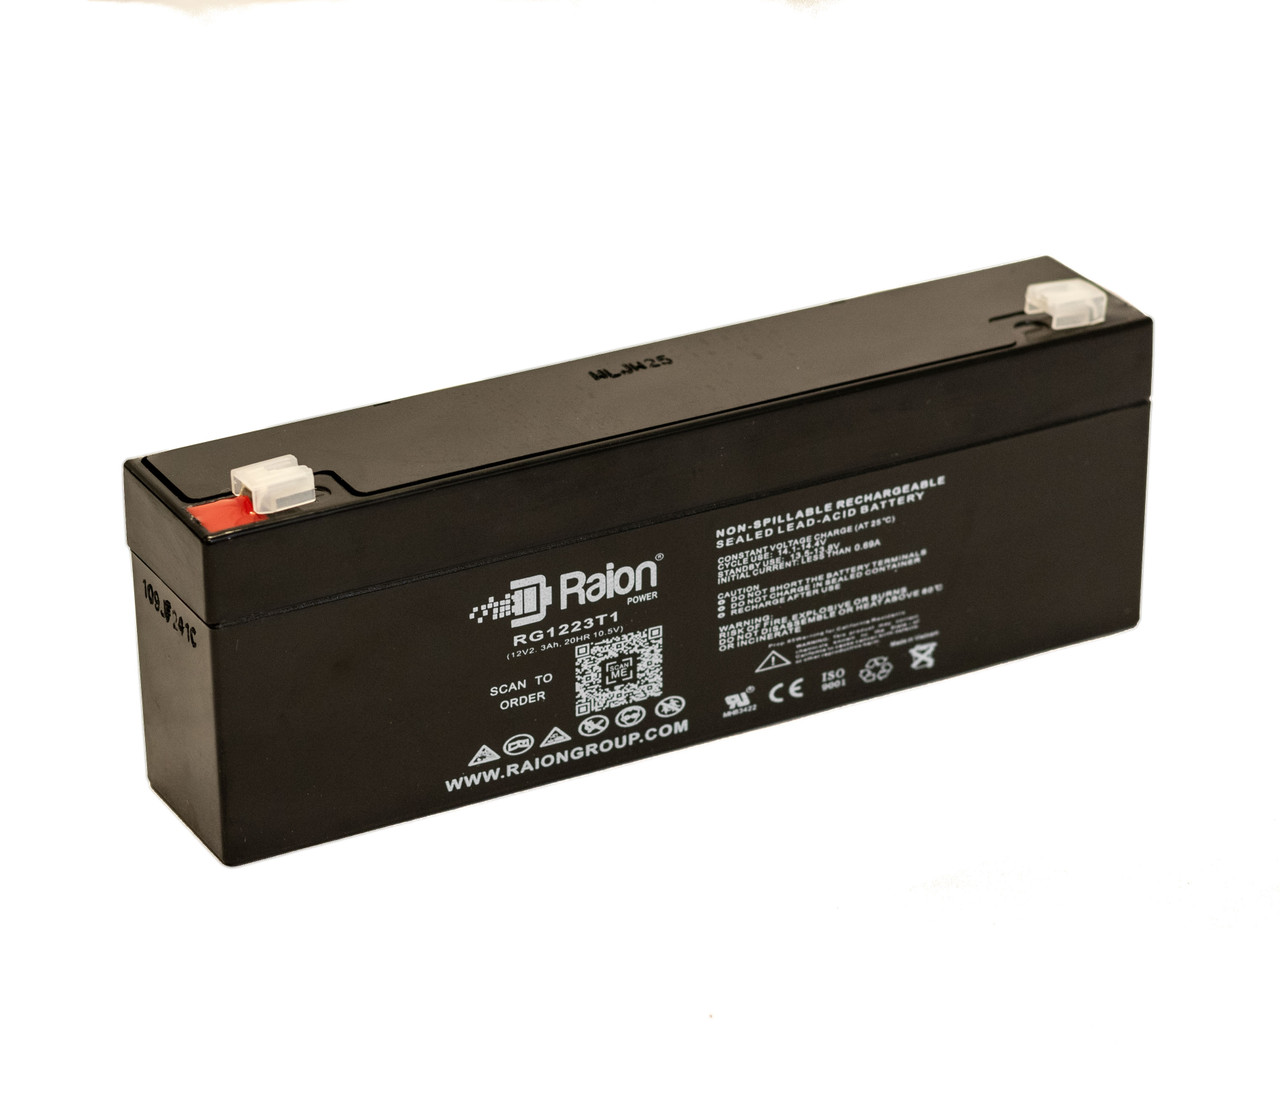 Raion Power RG1223T1 Replacement Battery for Ohio Medical Products 3760 BIOX IVA Oximeter